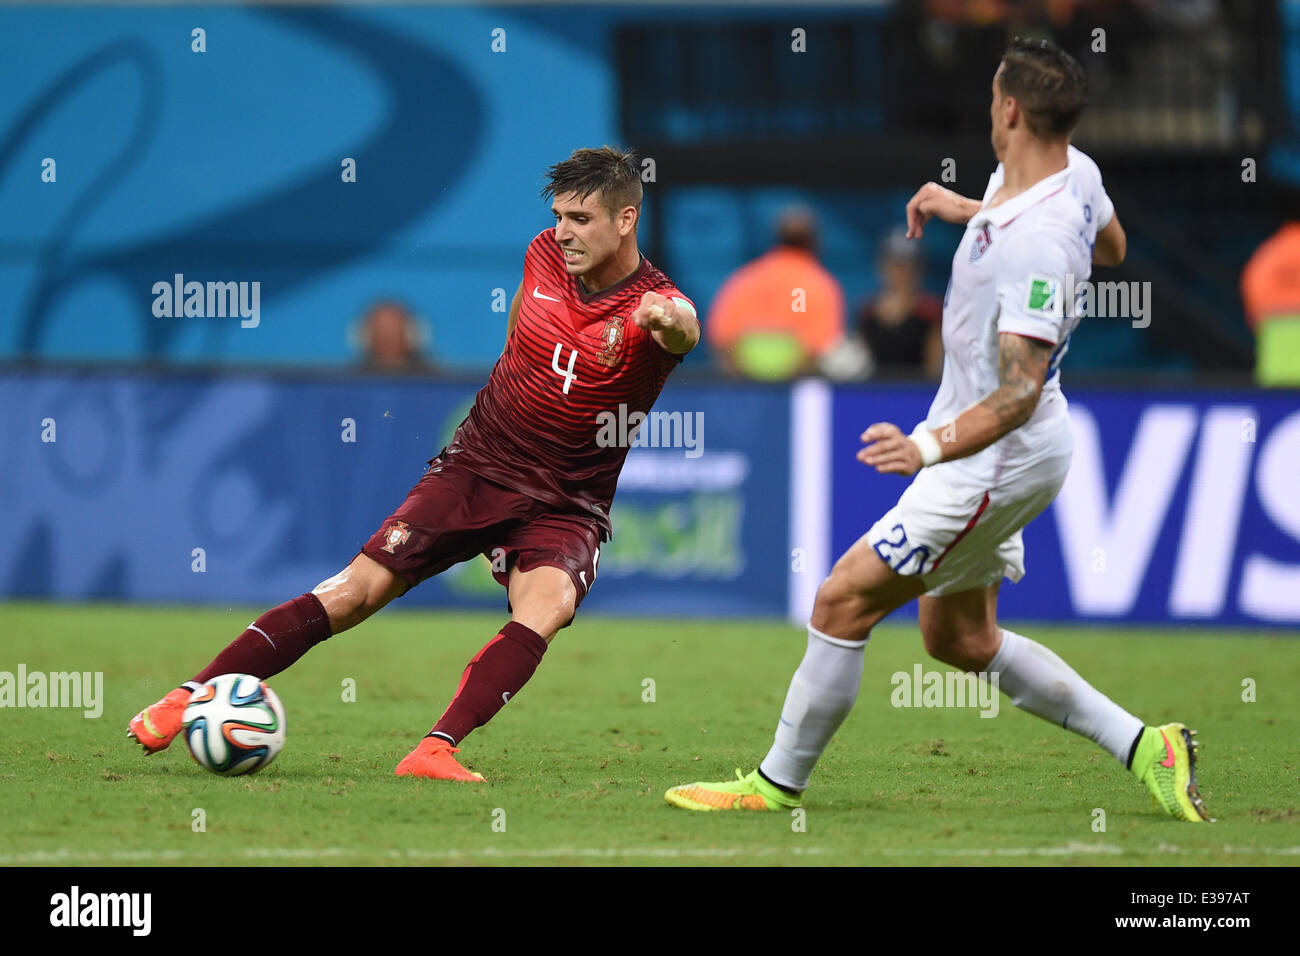 Manaus, Brazil. 22nd June, 2014. Miguel Veloso (L) of Portugal in action against Geoff Cameron of USA during the FIFA World Cup 2014 group G preliminary round match between the USA and Portugal at the Arena Amazonia Stadium in Manaus, Brazil, 22 June 2014. Photo: Marius Becker/dpa/Alamy Live News Stock Photo